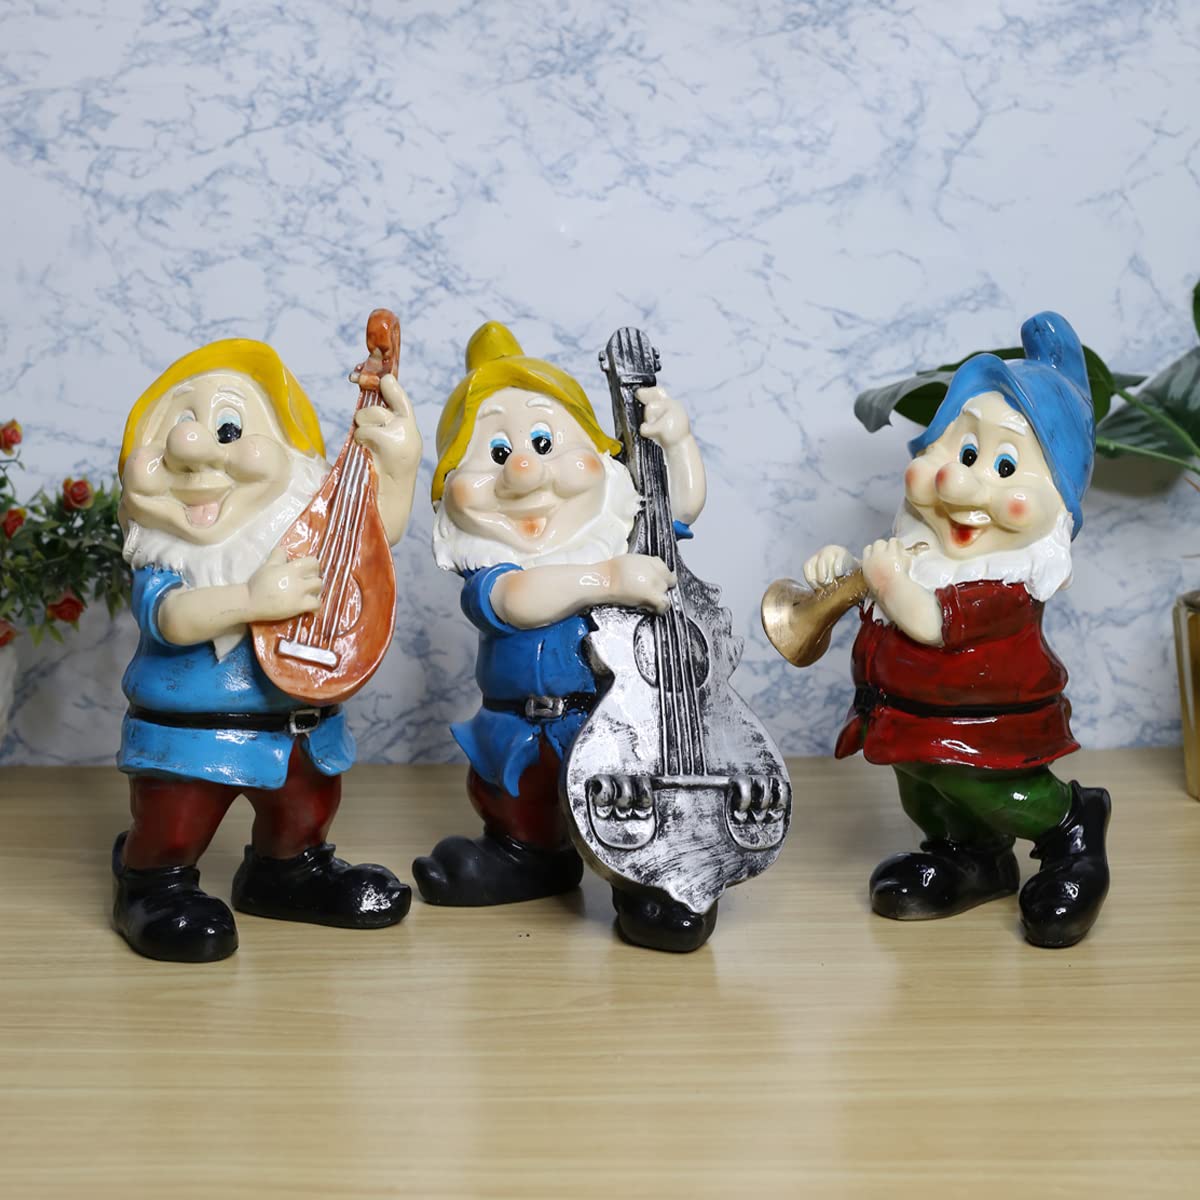 Gardens Accessories Gnome Musical Instrumental Statues (Pack of 3)